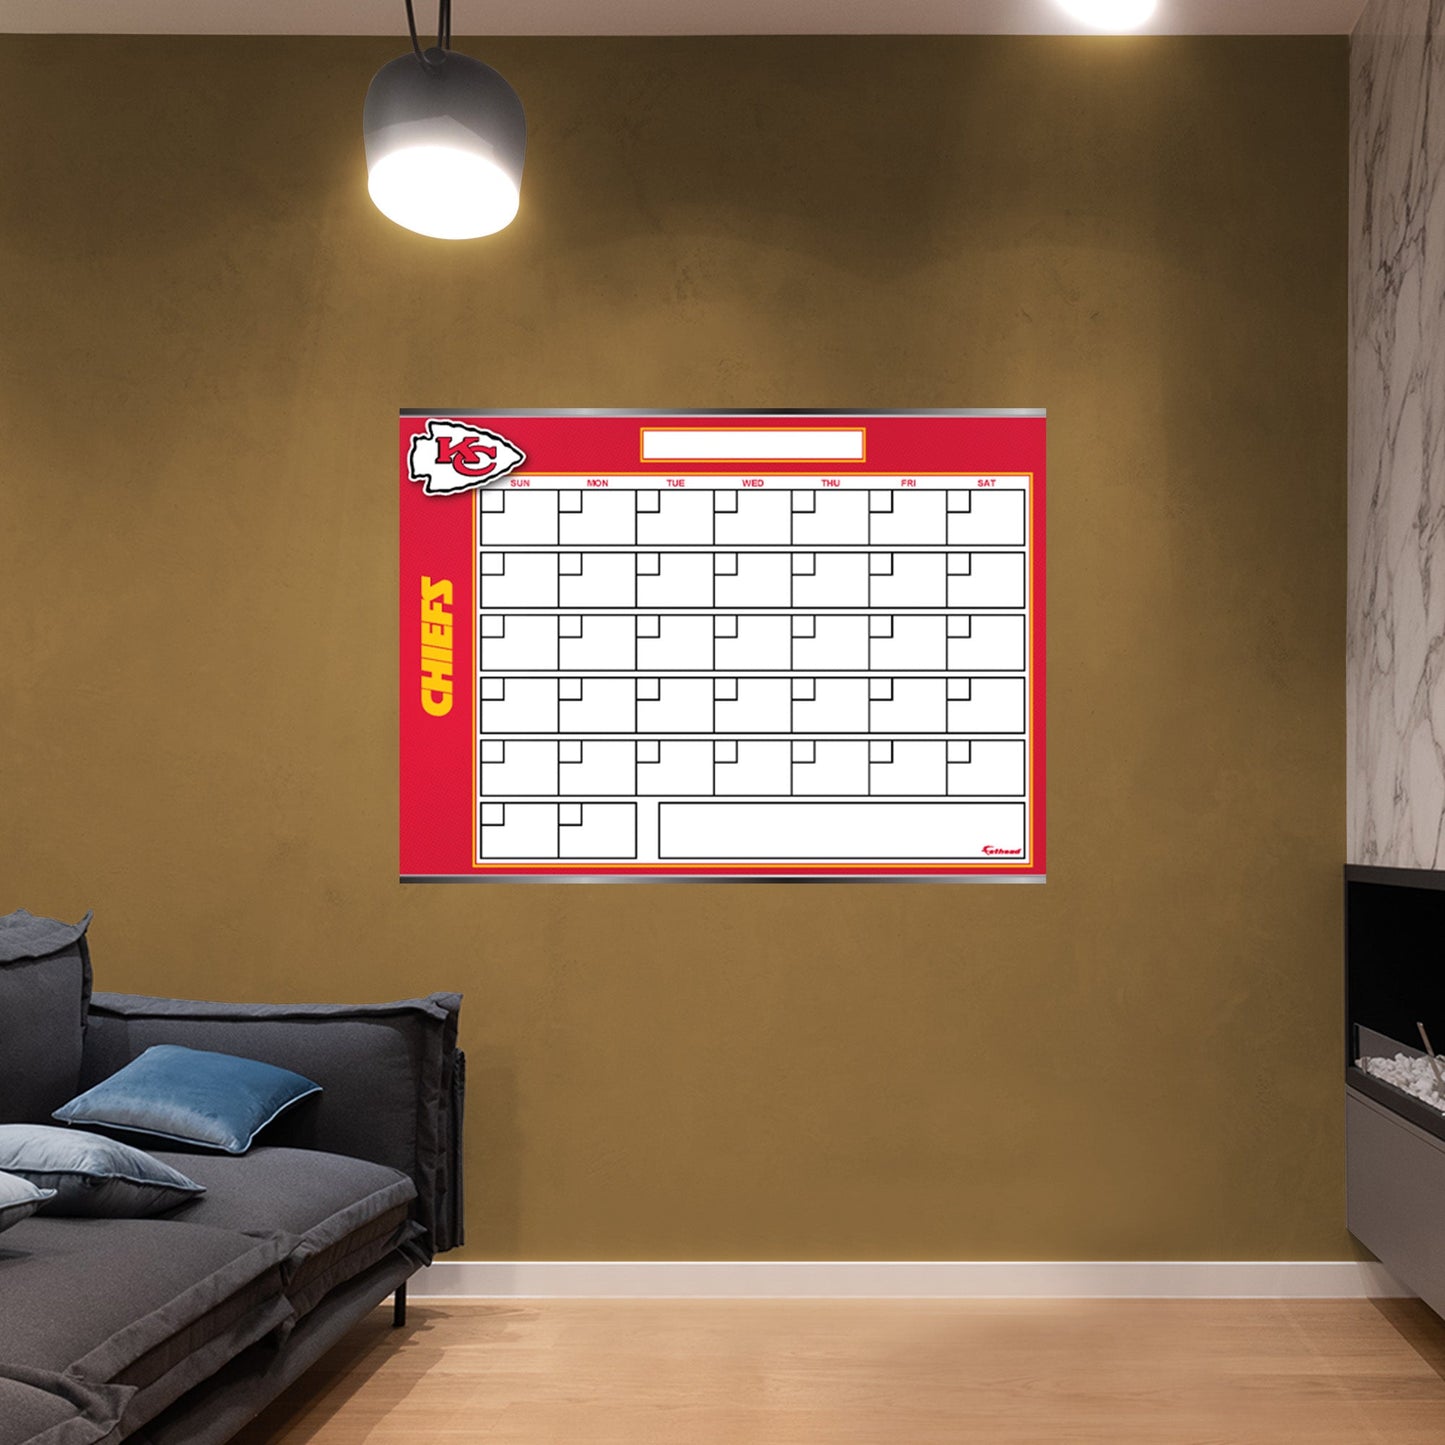 Kansas City Chiefs: Dry Erase Calendar - Officially Licensed NFL Removable Adhesive Decal